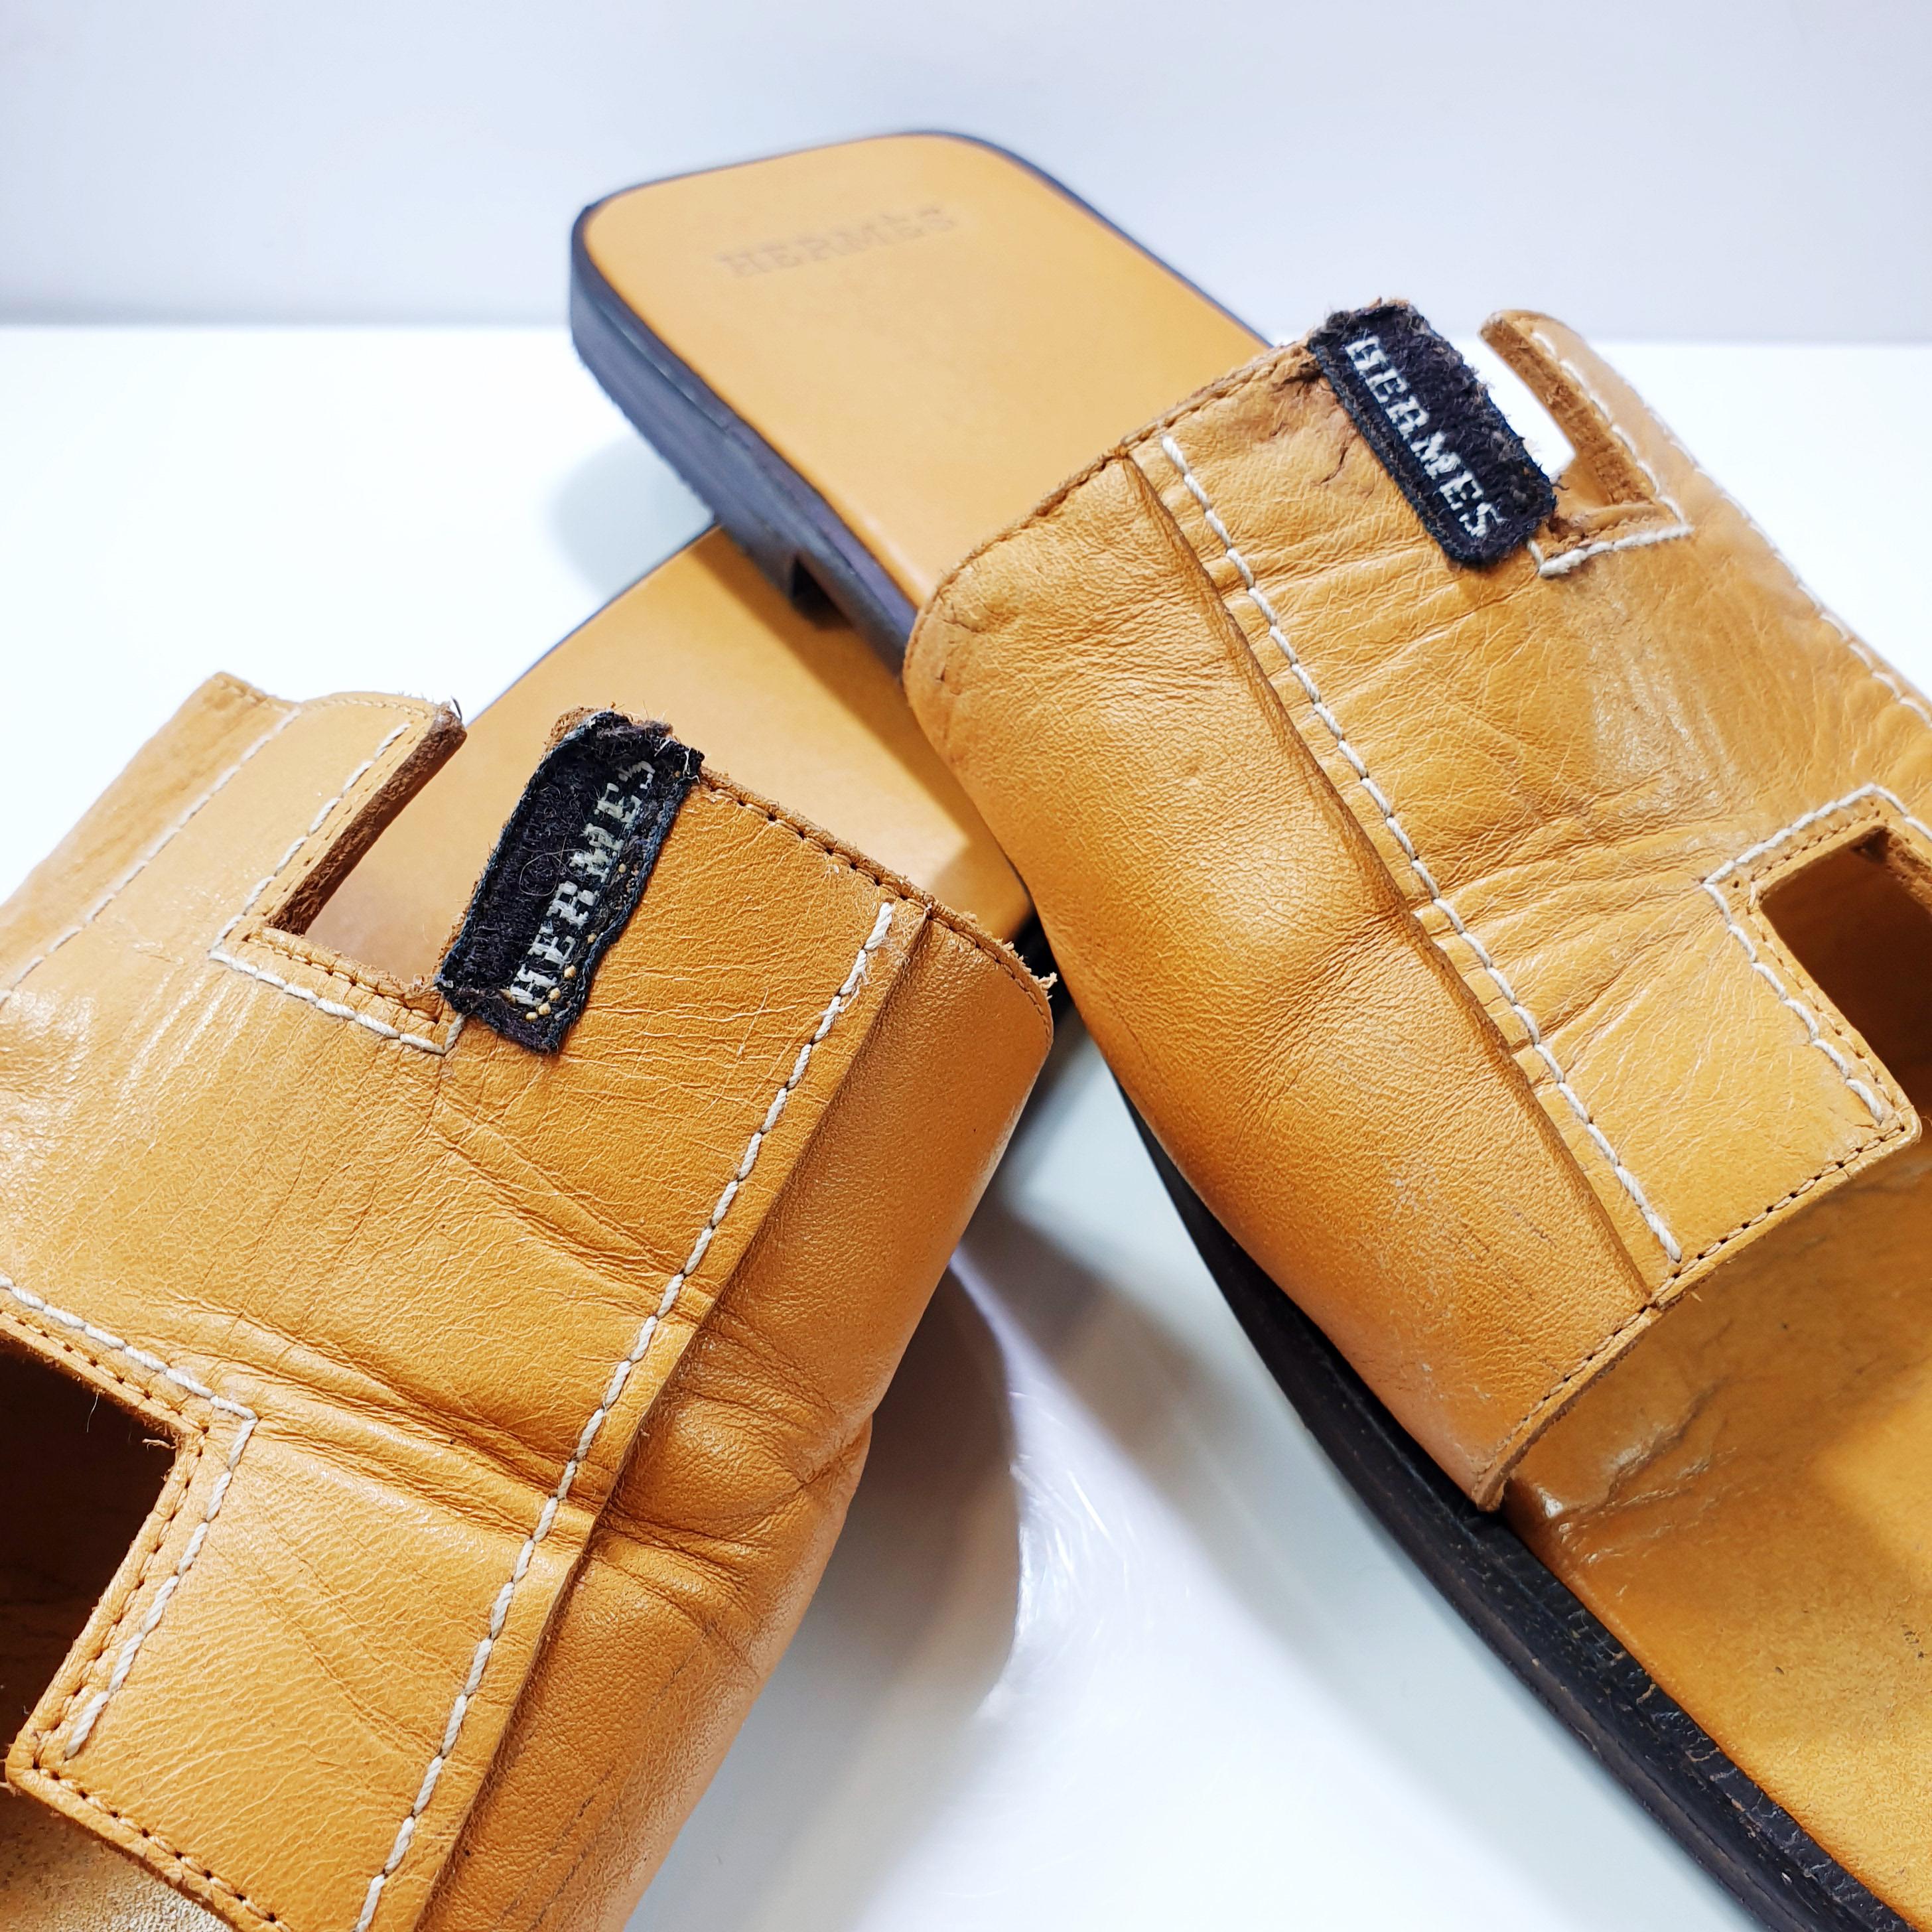 Guaranteed authentic Hermes Oran  leather slide.
The iconic top stitched H cutout over the top of the foot.
Blush embossed leather insole.
Tone on tone wood heel with leather sole.
SIZE 39.5
USA SIZE 9.5

CONDITION:
Worn, recently serviced, Hermes